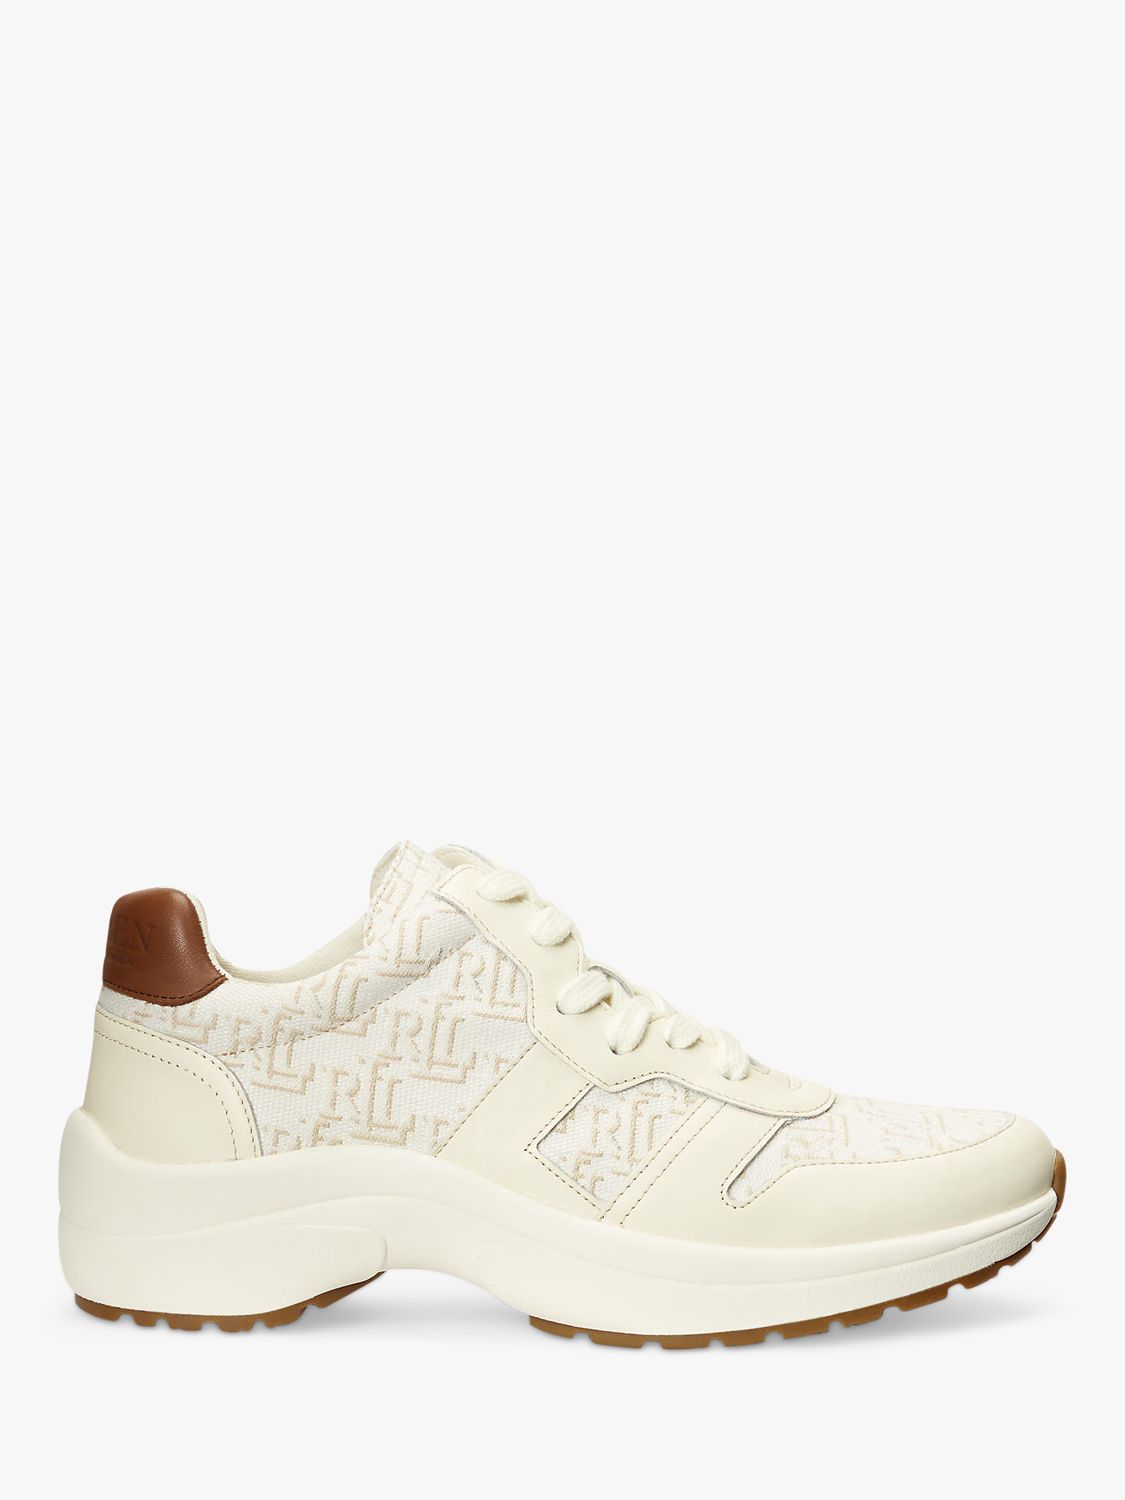 Ralph Lauren Rylee Monogram Jacquard Trainers Vanilla 7 female Upper: cotton, polyester, leather, Sole: rubber, Lining: polyurethane, leather